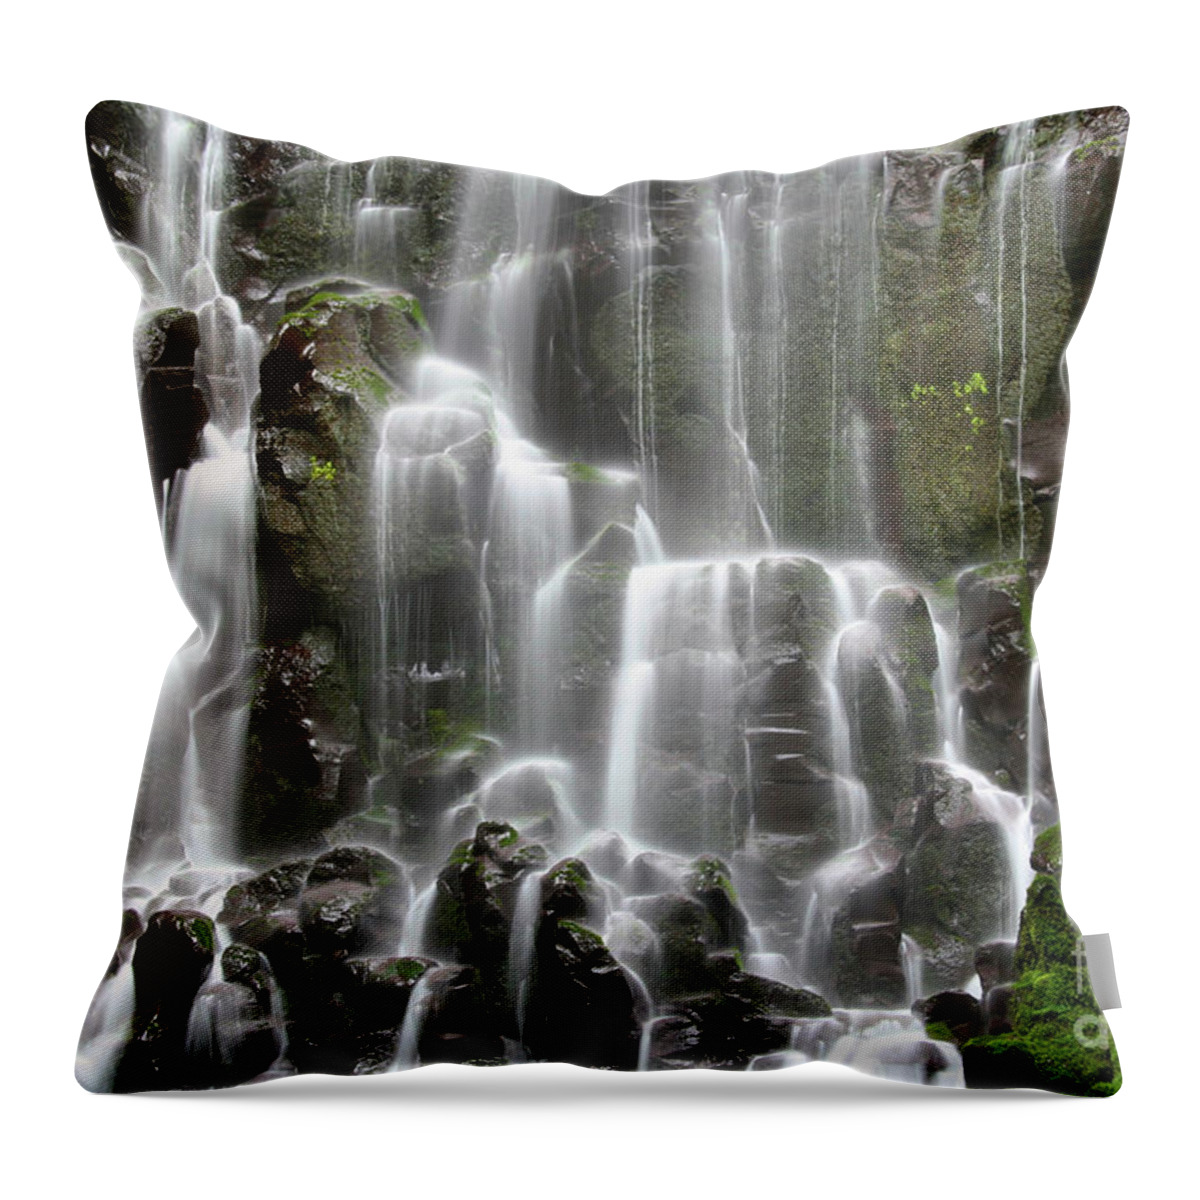 Running Water Throw Pillow featuring the photograph Ramona Falls #2 by Bruce Block